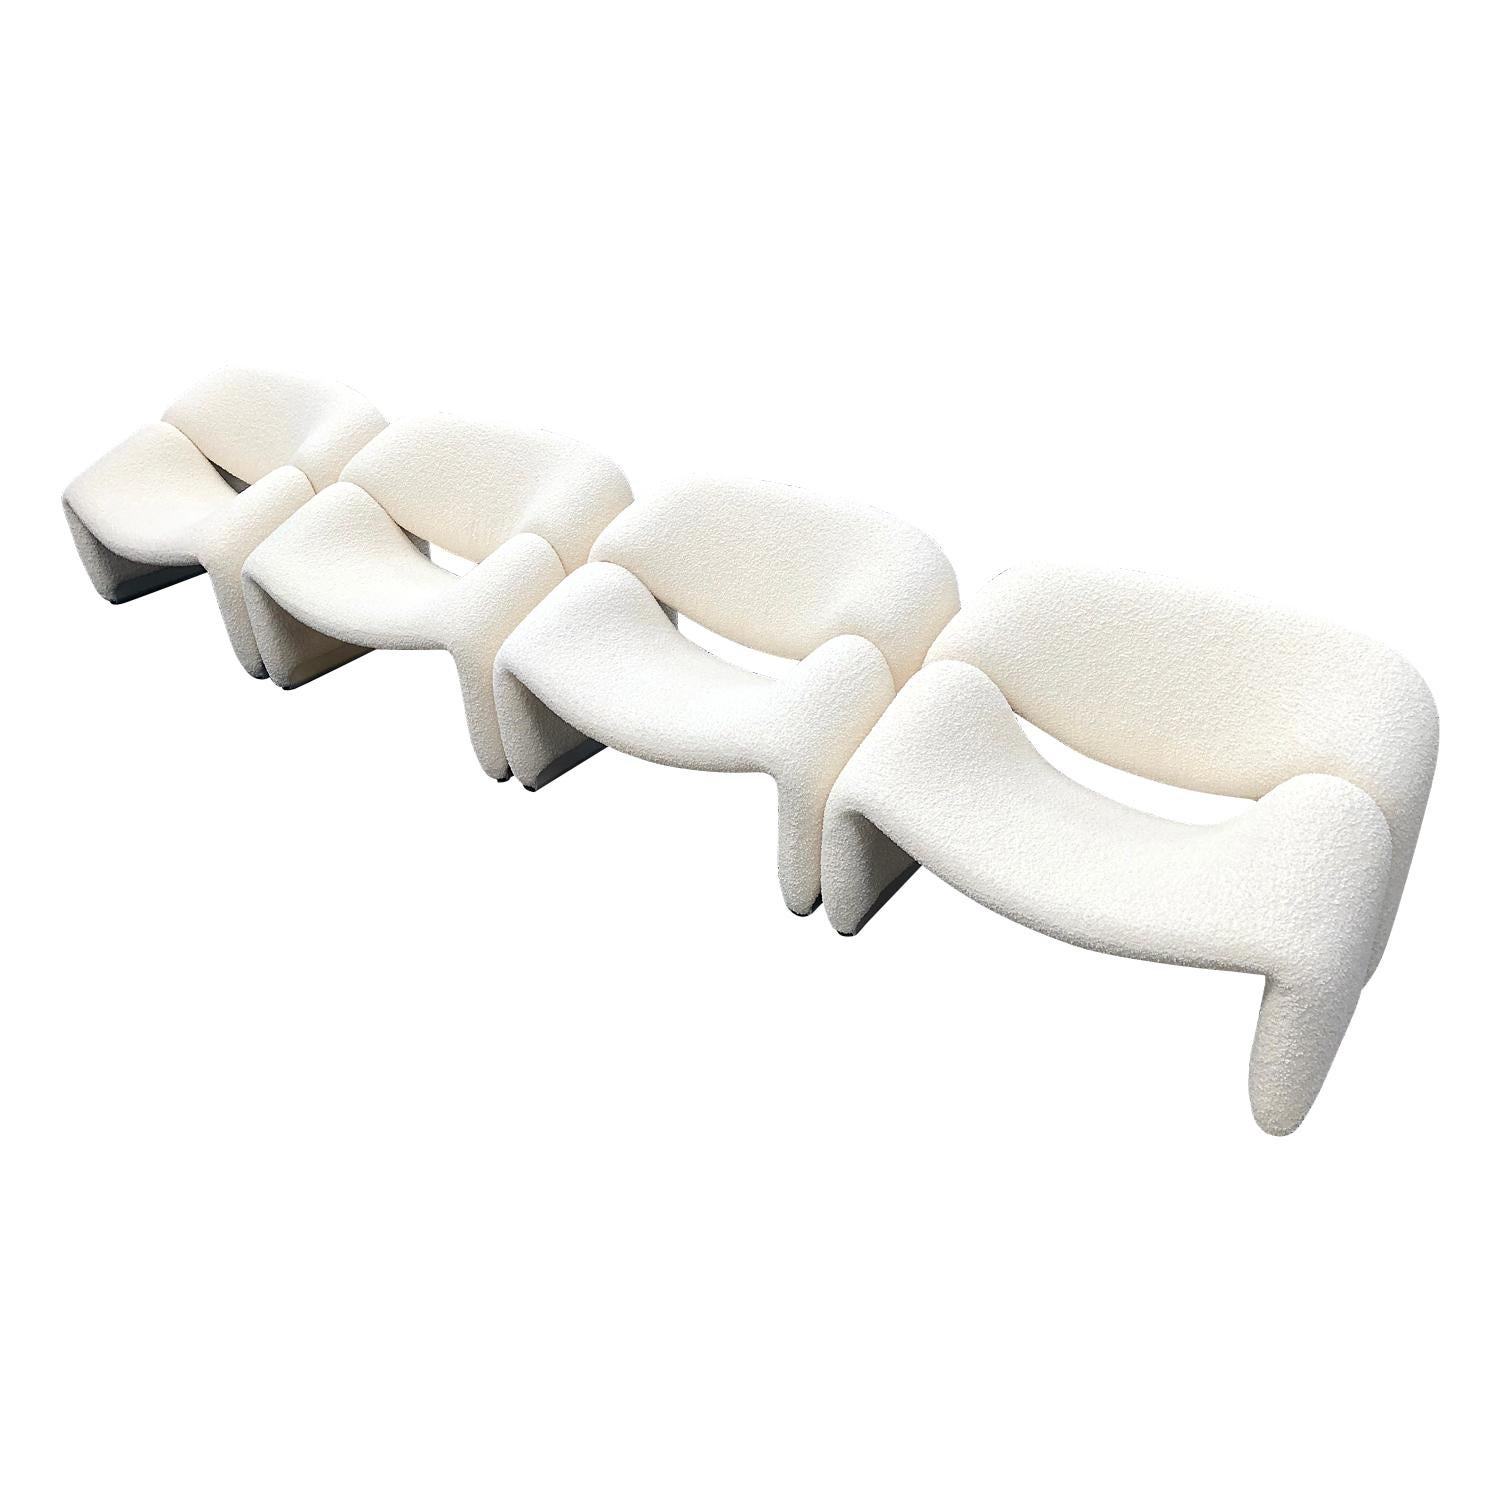 Pair of f598 ‘Groovy’ 'M' lounge chairs by Pierre Paulin for Artifort – Netherlands, 1972.
Price is per chair
The chairs have been new upholstered in a beautiful off-white bouclé wool fabric from Paris. 
Feet colours available in black, white and